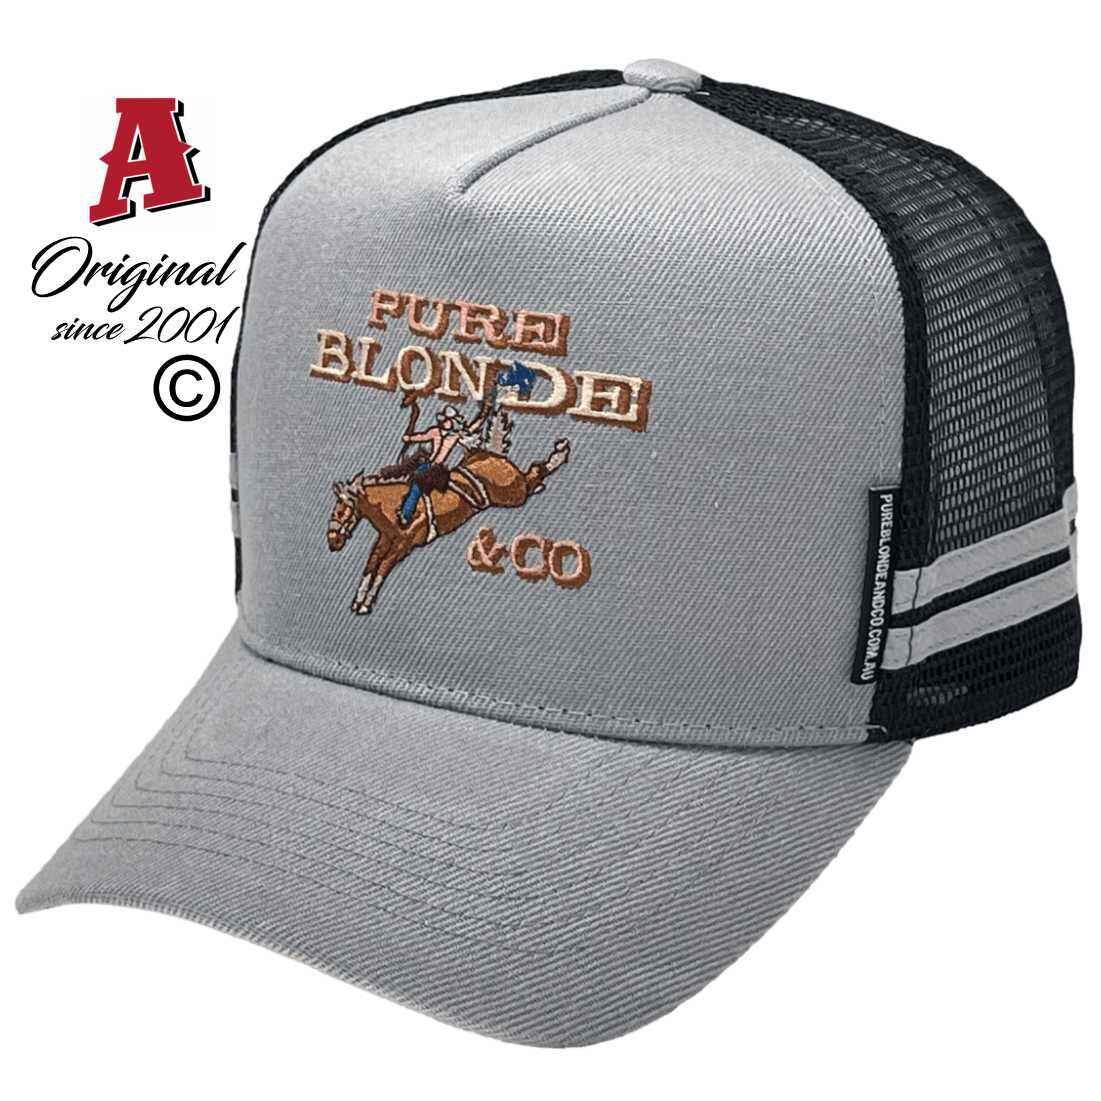 Pure Blond Co Dubbo NSW HP Basic Aussie Trucker Hats with Australian HeadFit Crown and Double SideBands Silver Black